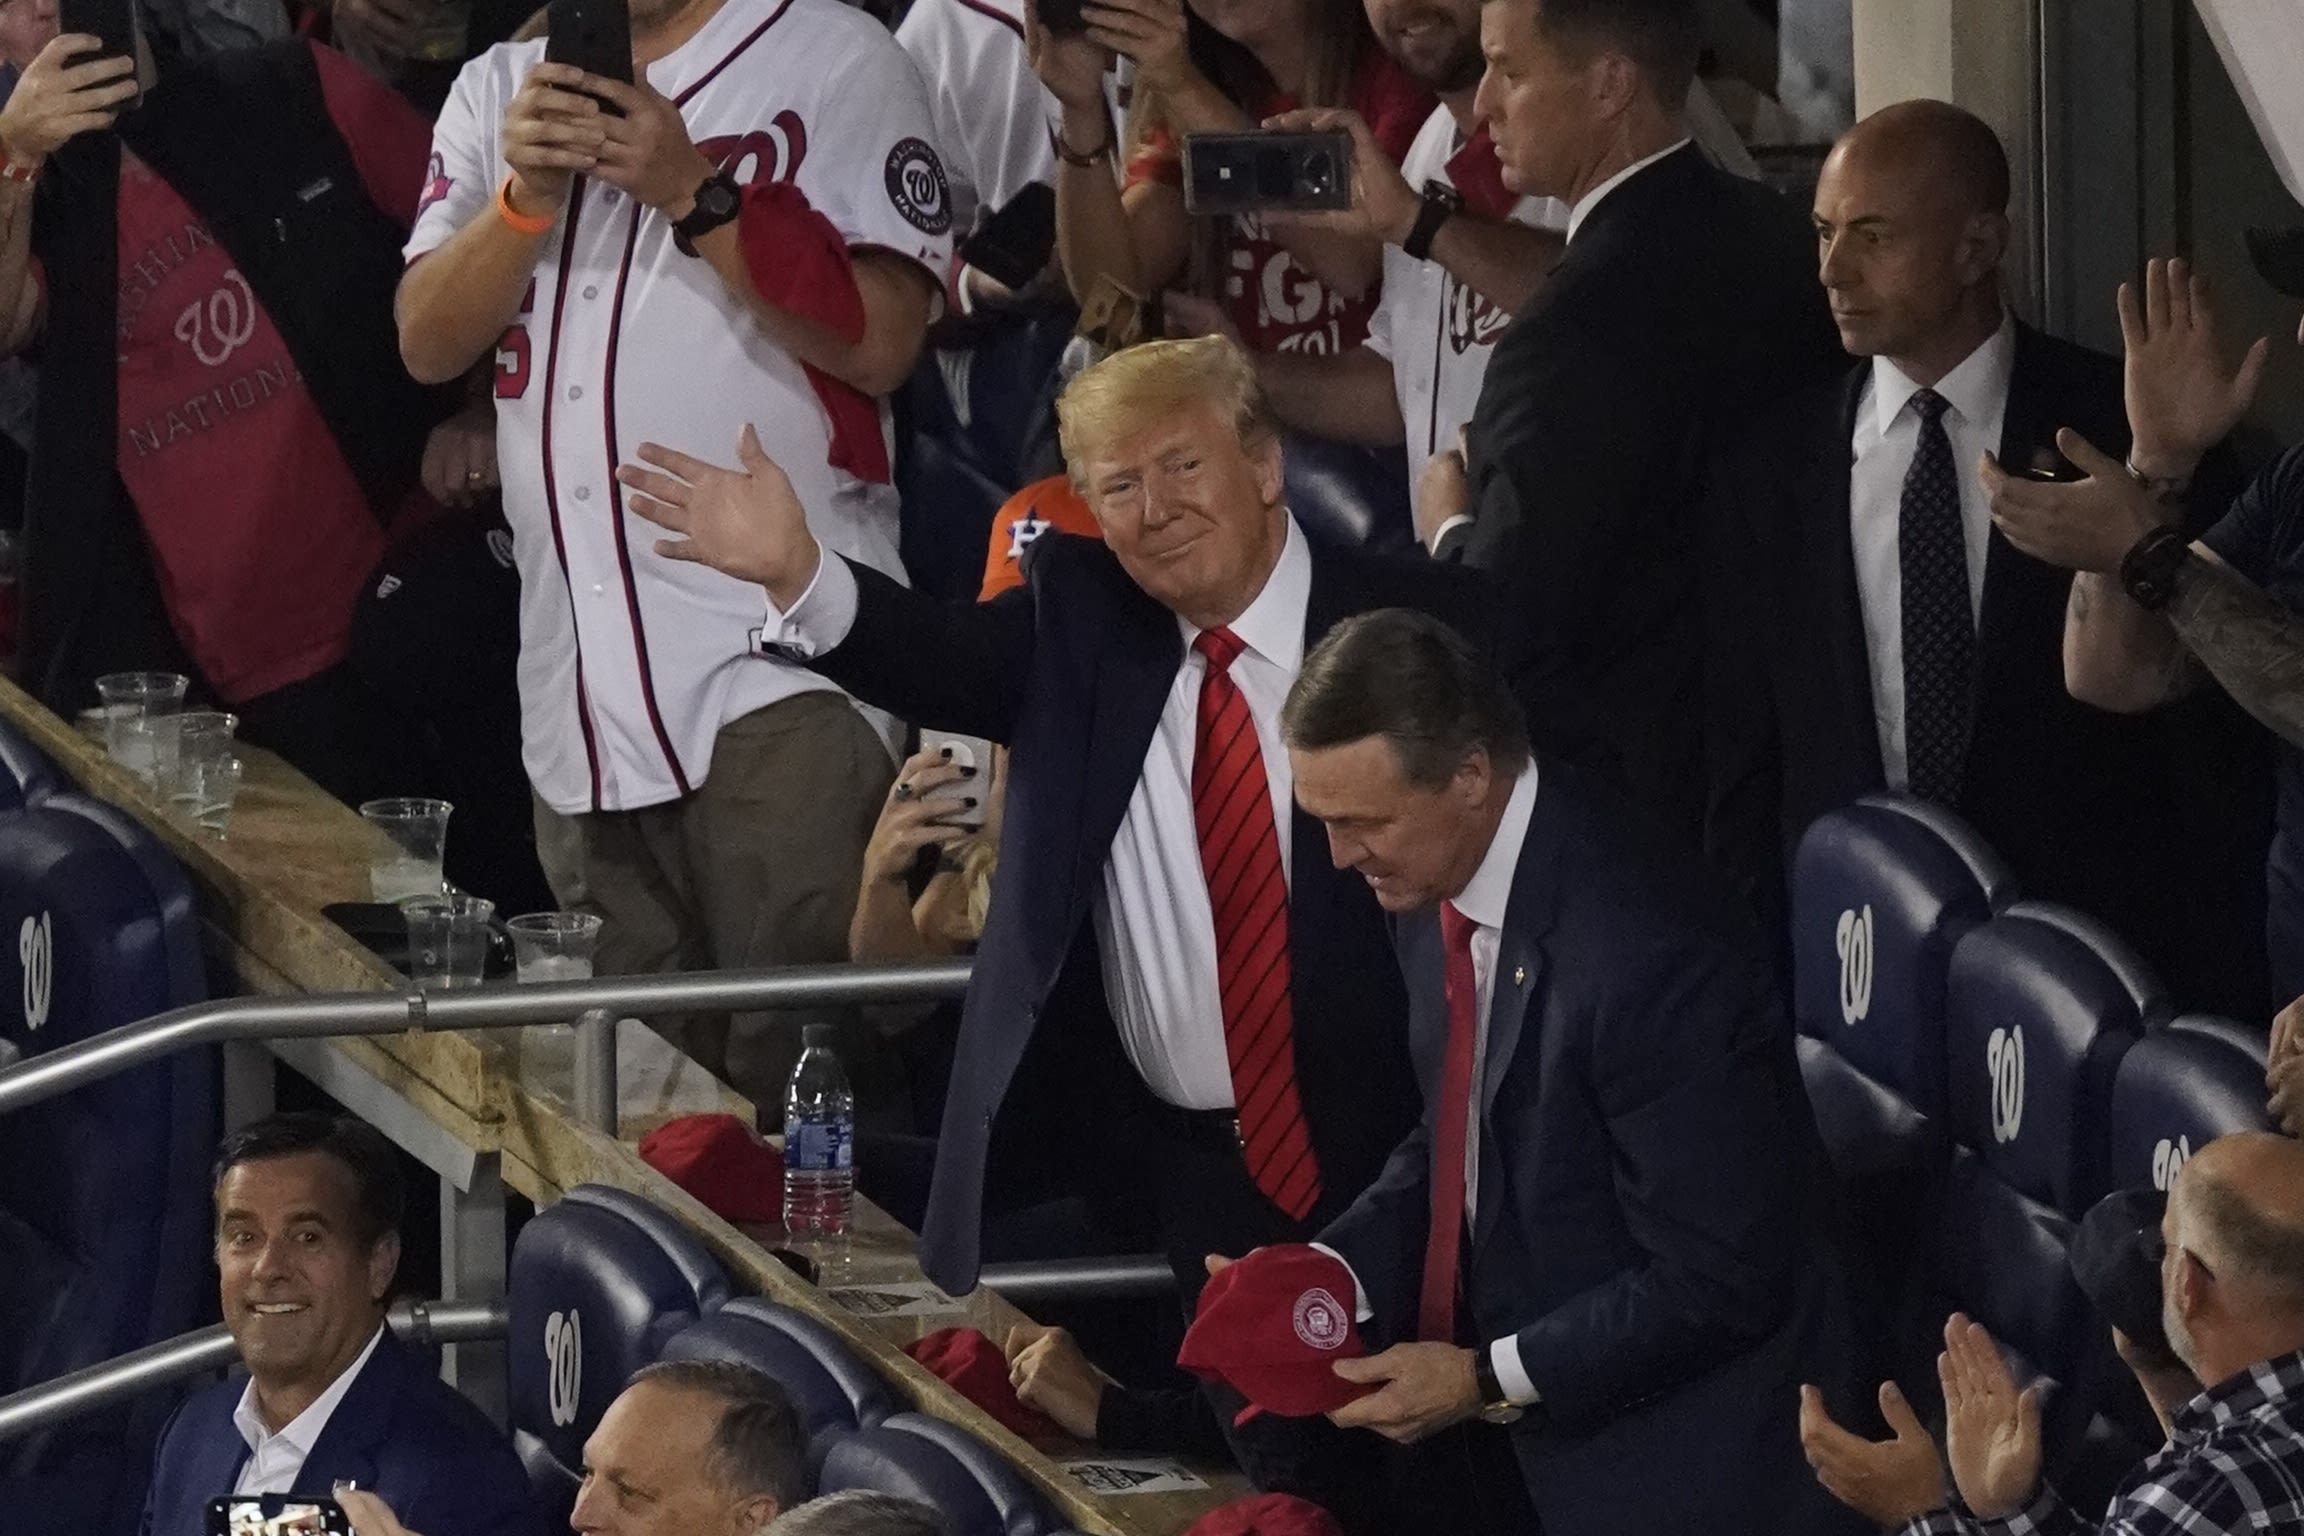 Washington Nationals fans boo Trump campaign ad during World